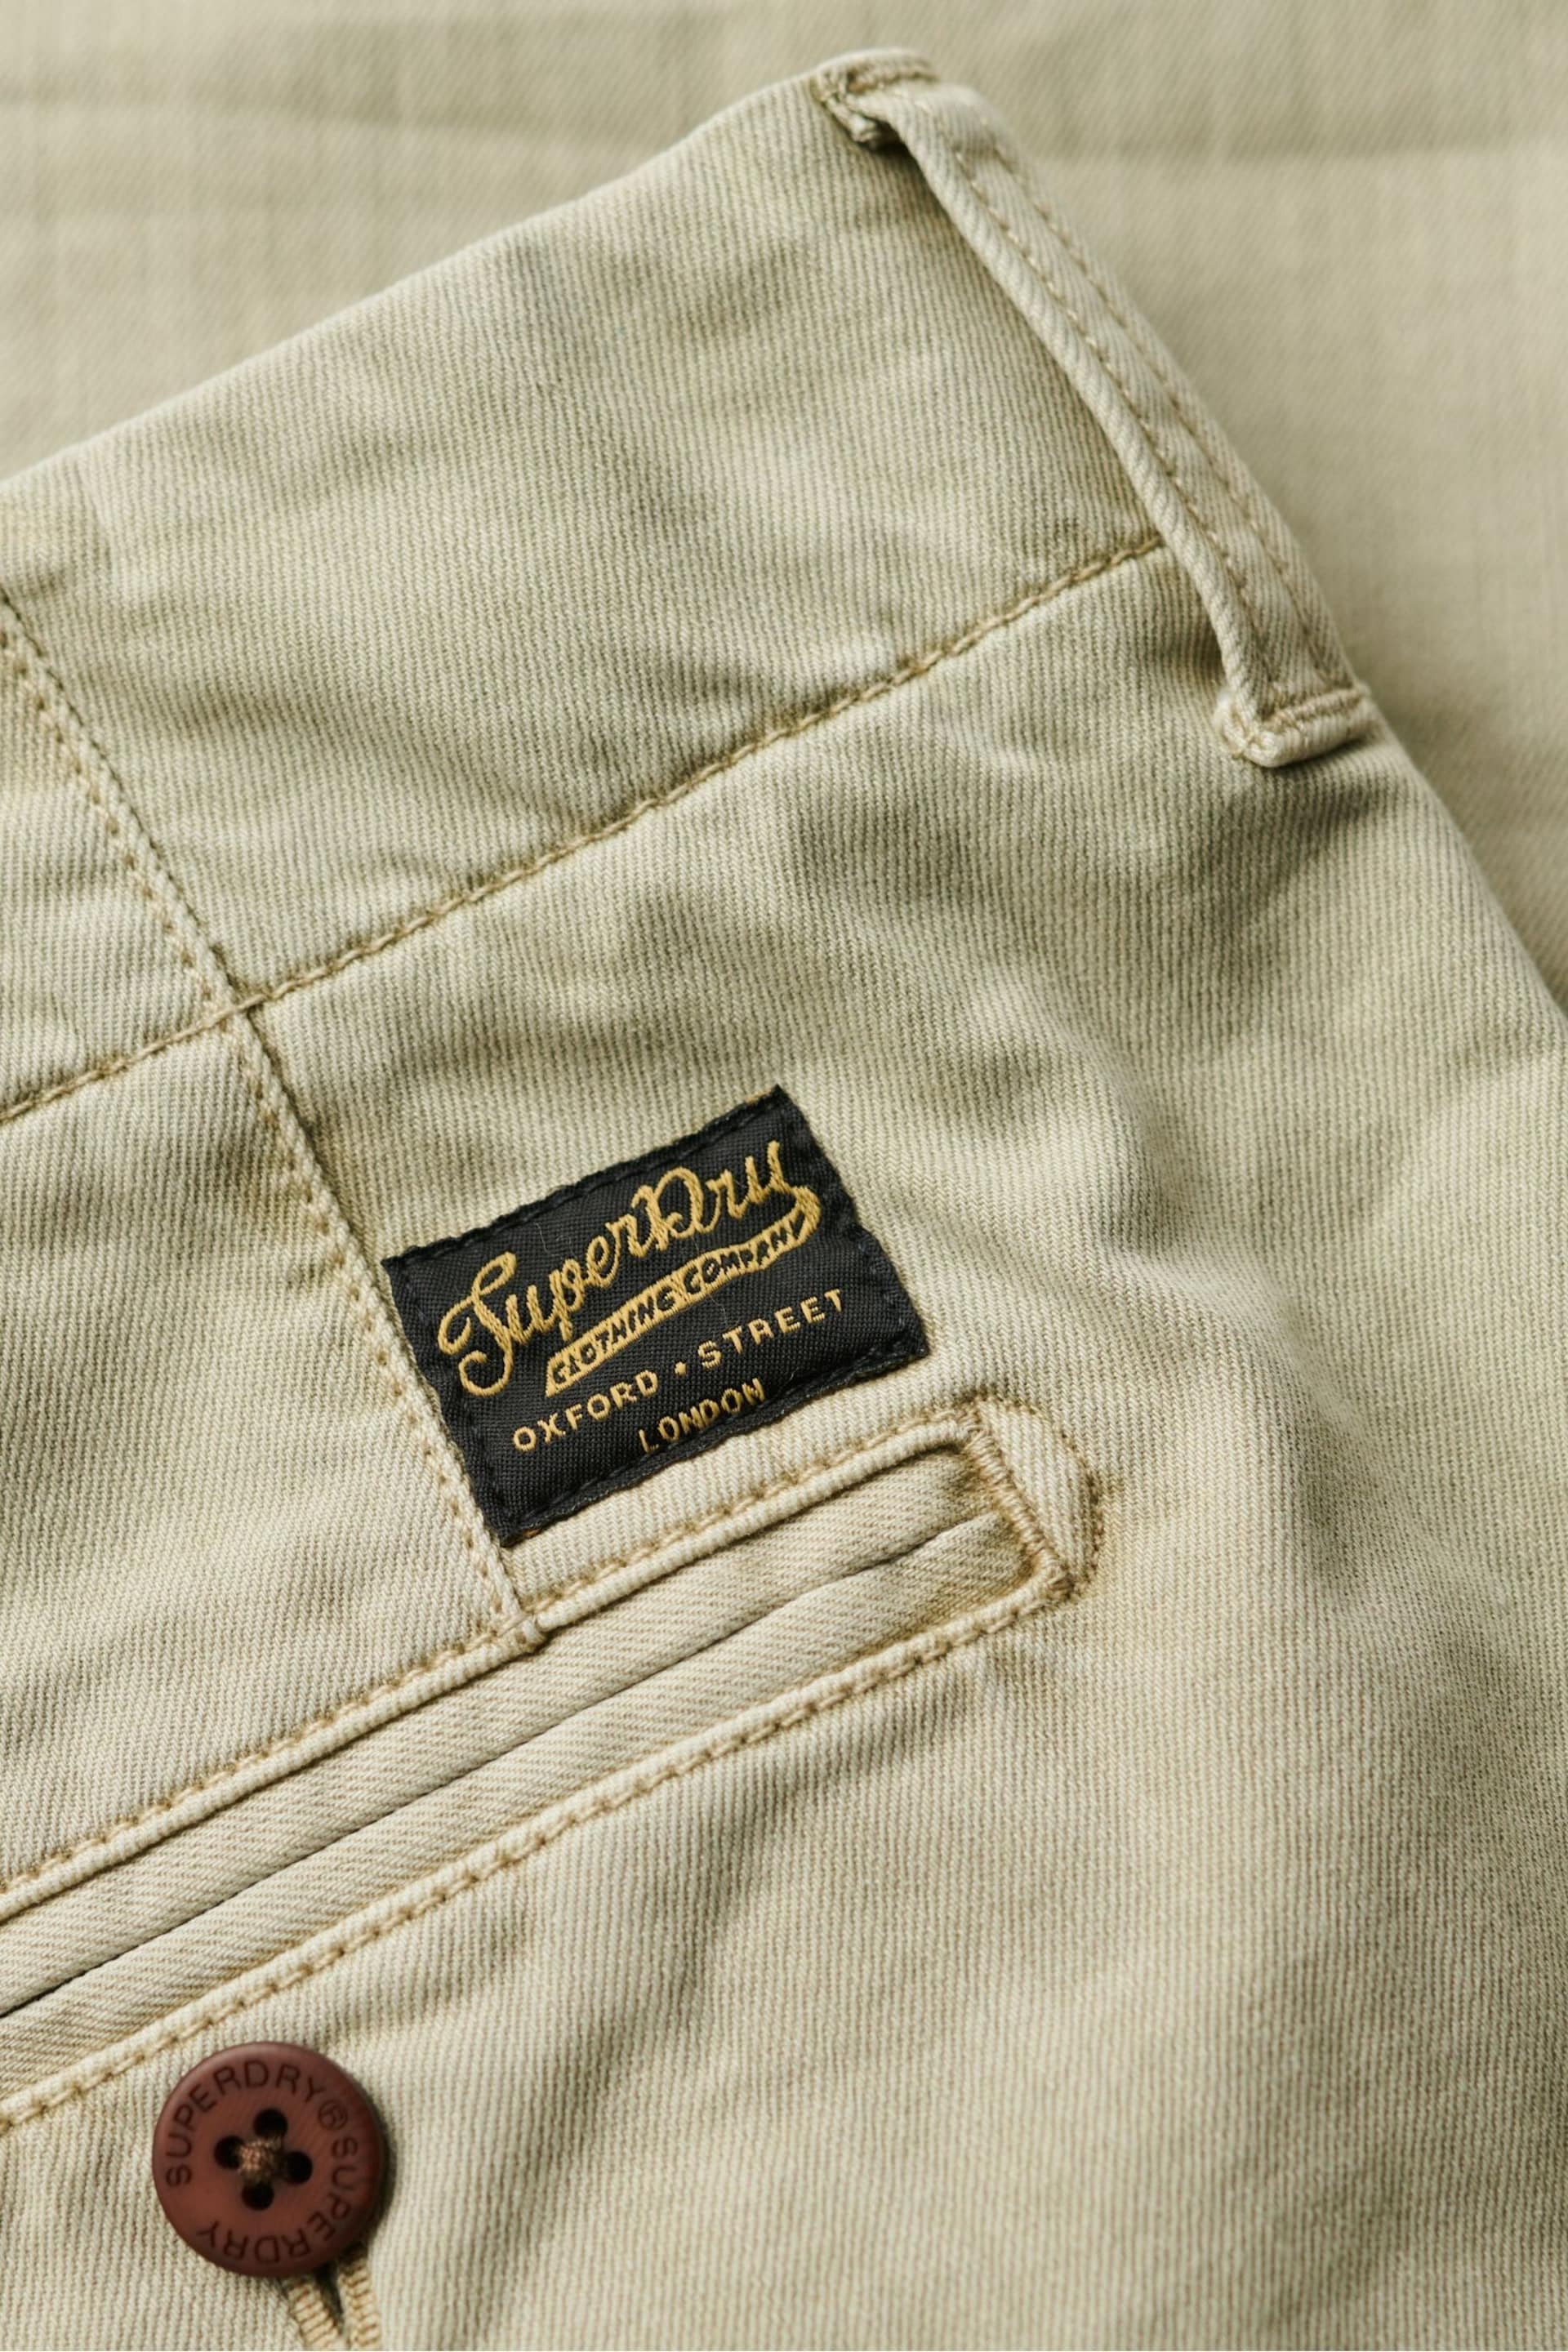 Superdry Natural International Chino Trousers - Image 8 of 8